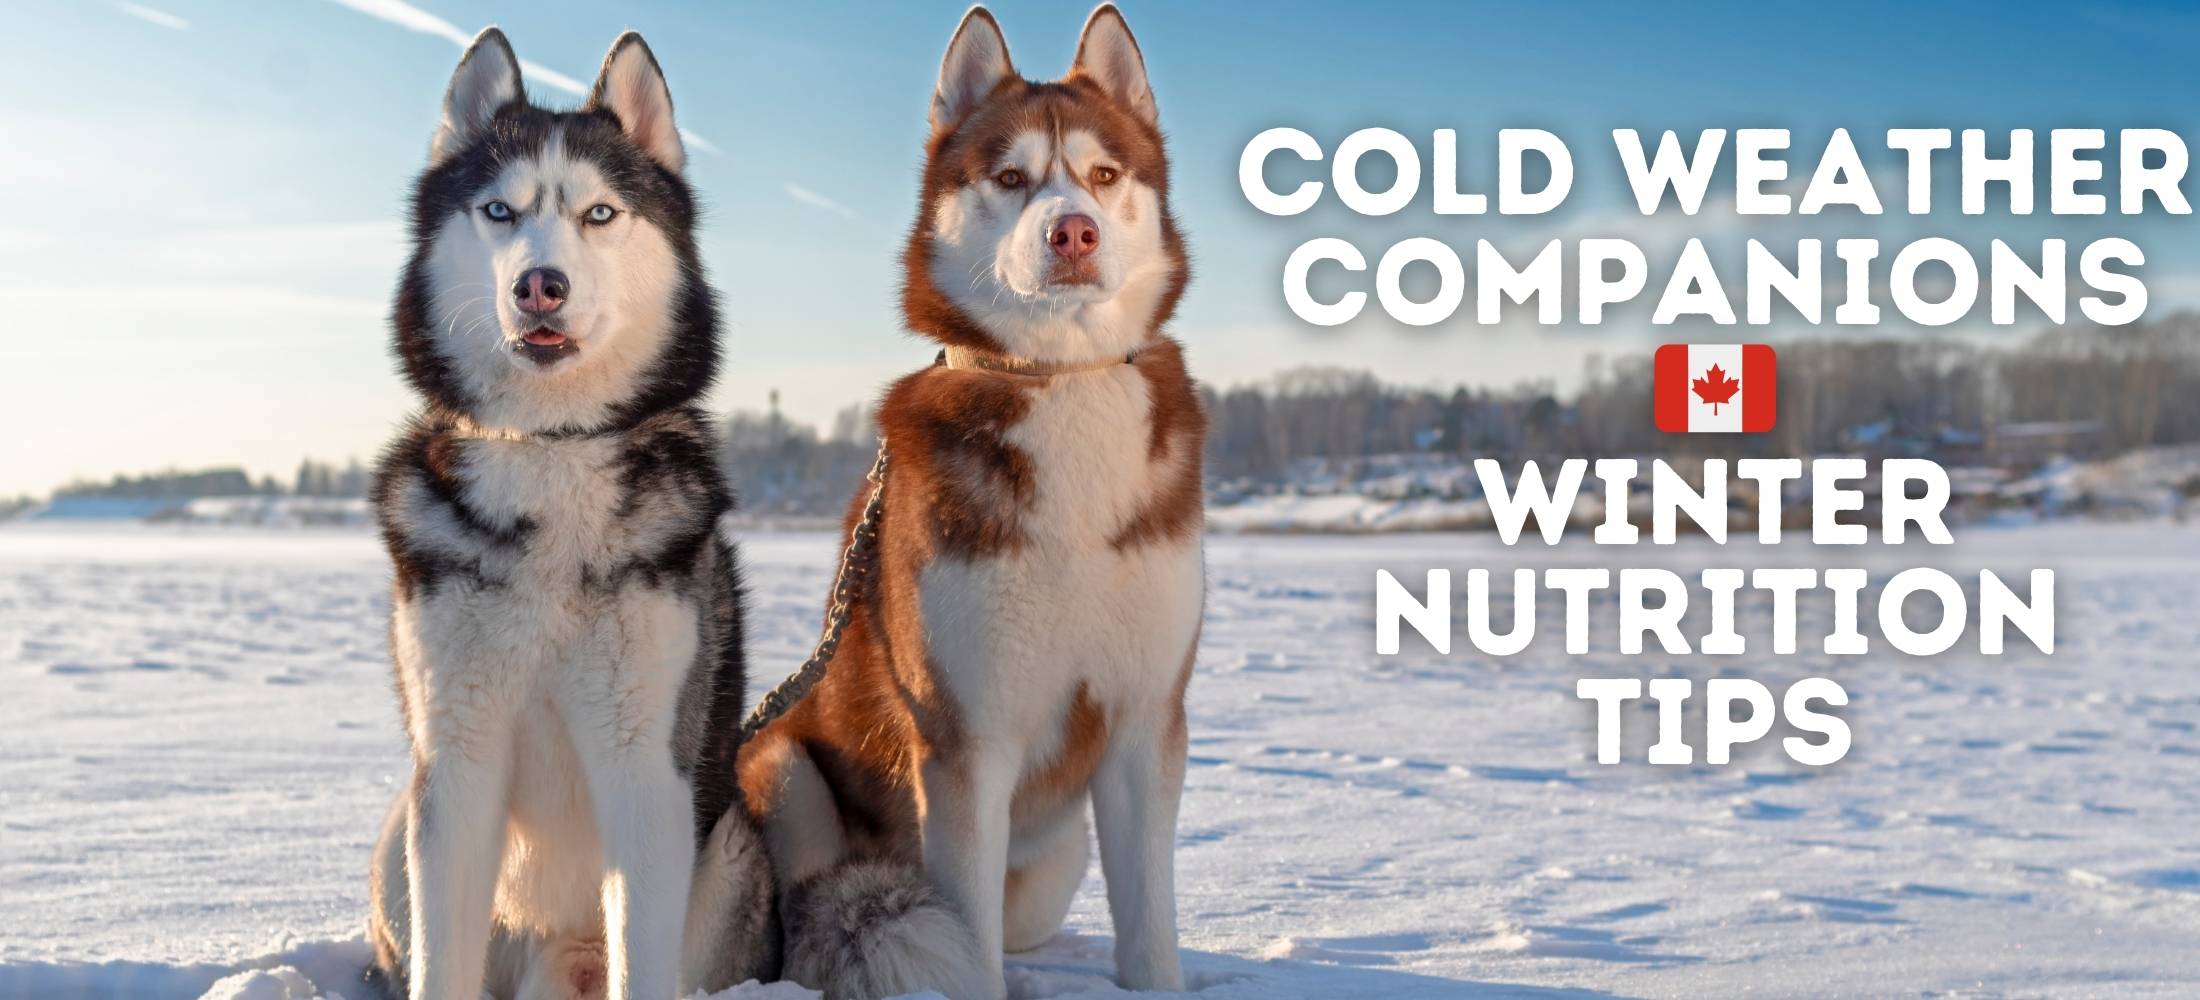 Cold Weather Companions: Nutrition Tips for Canadian Dogs in Winter